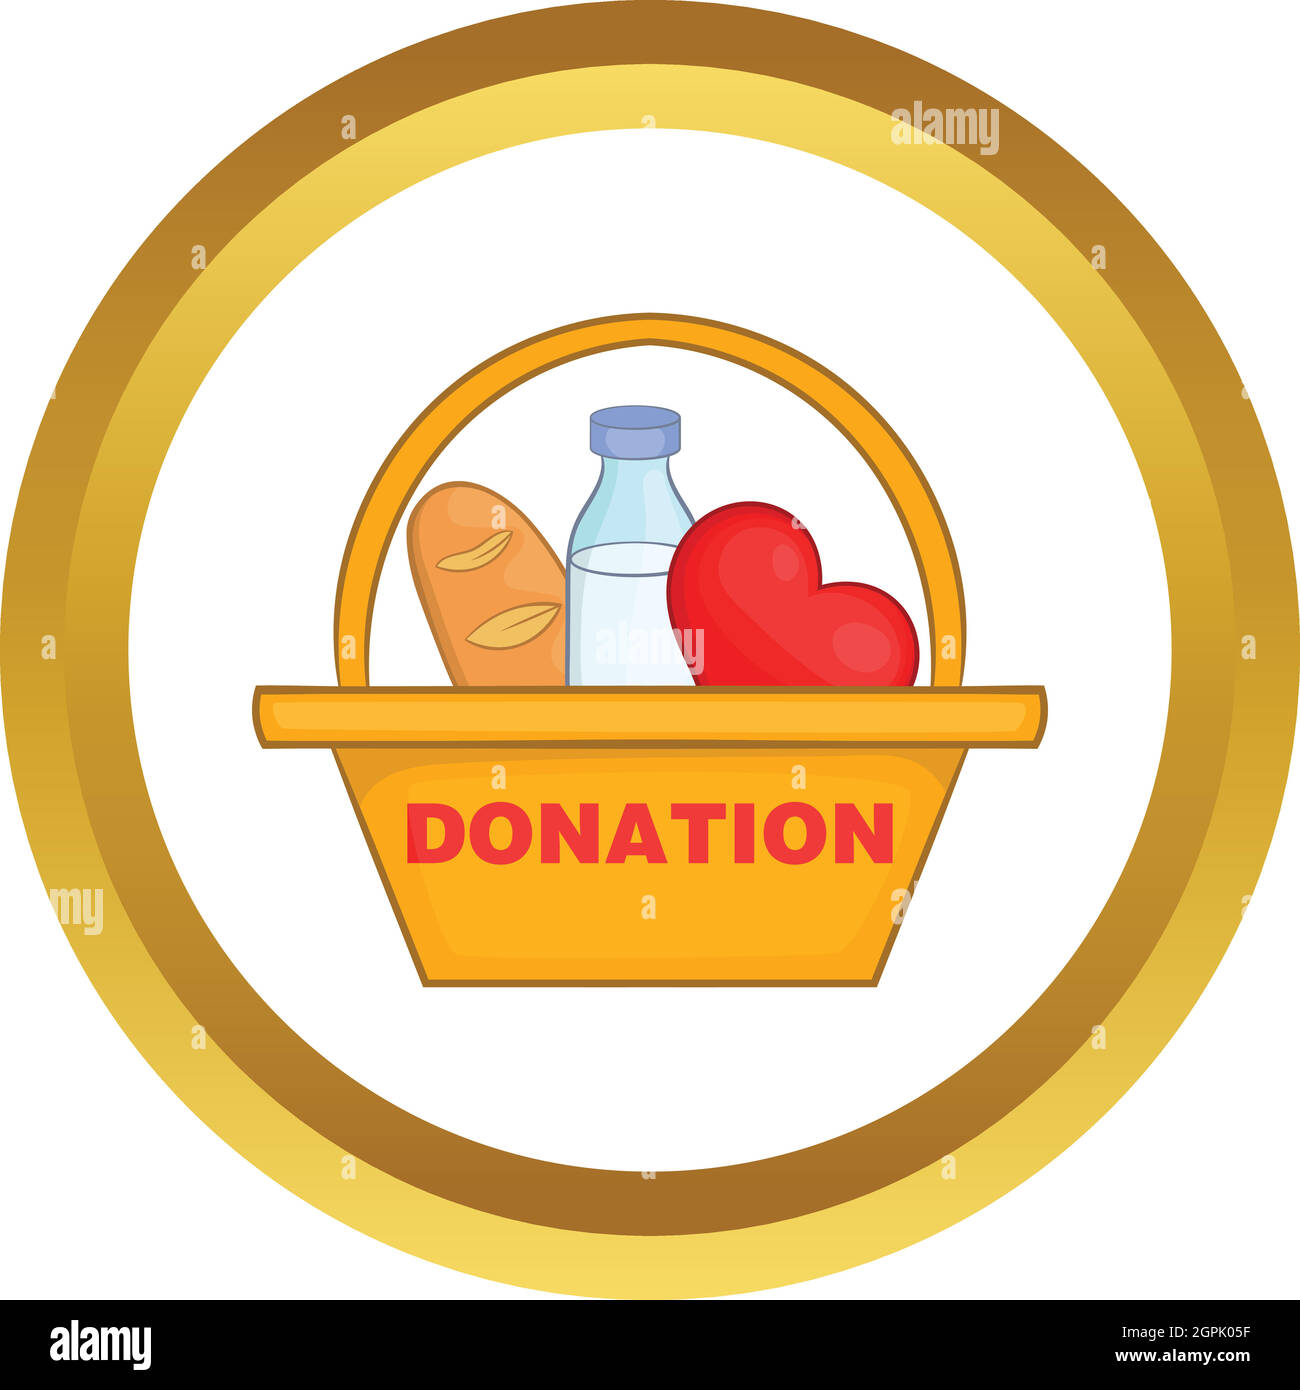 Please Donate Vector Sign Stock Illustration - Download Image Now